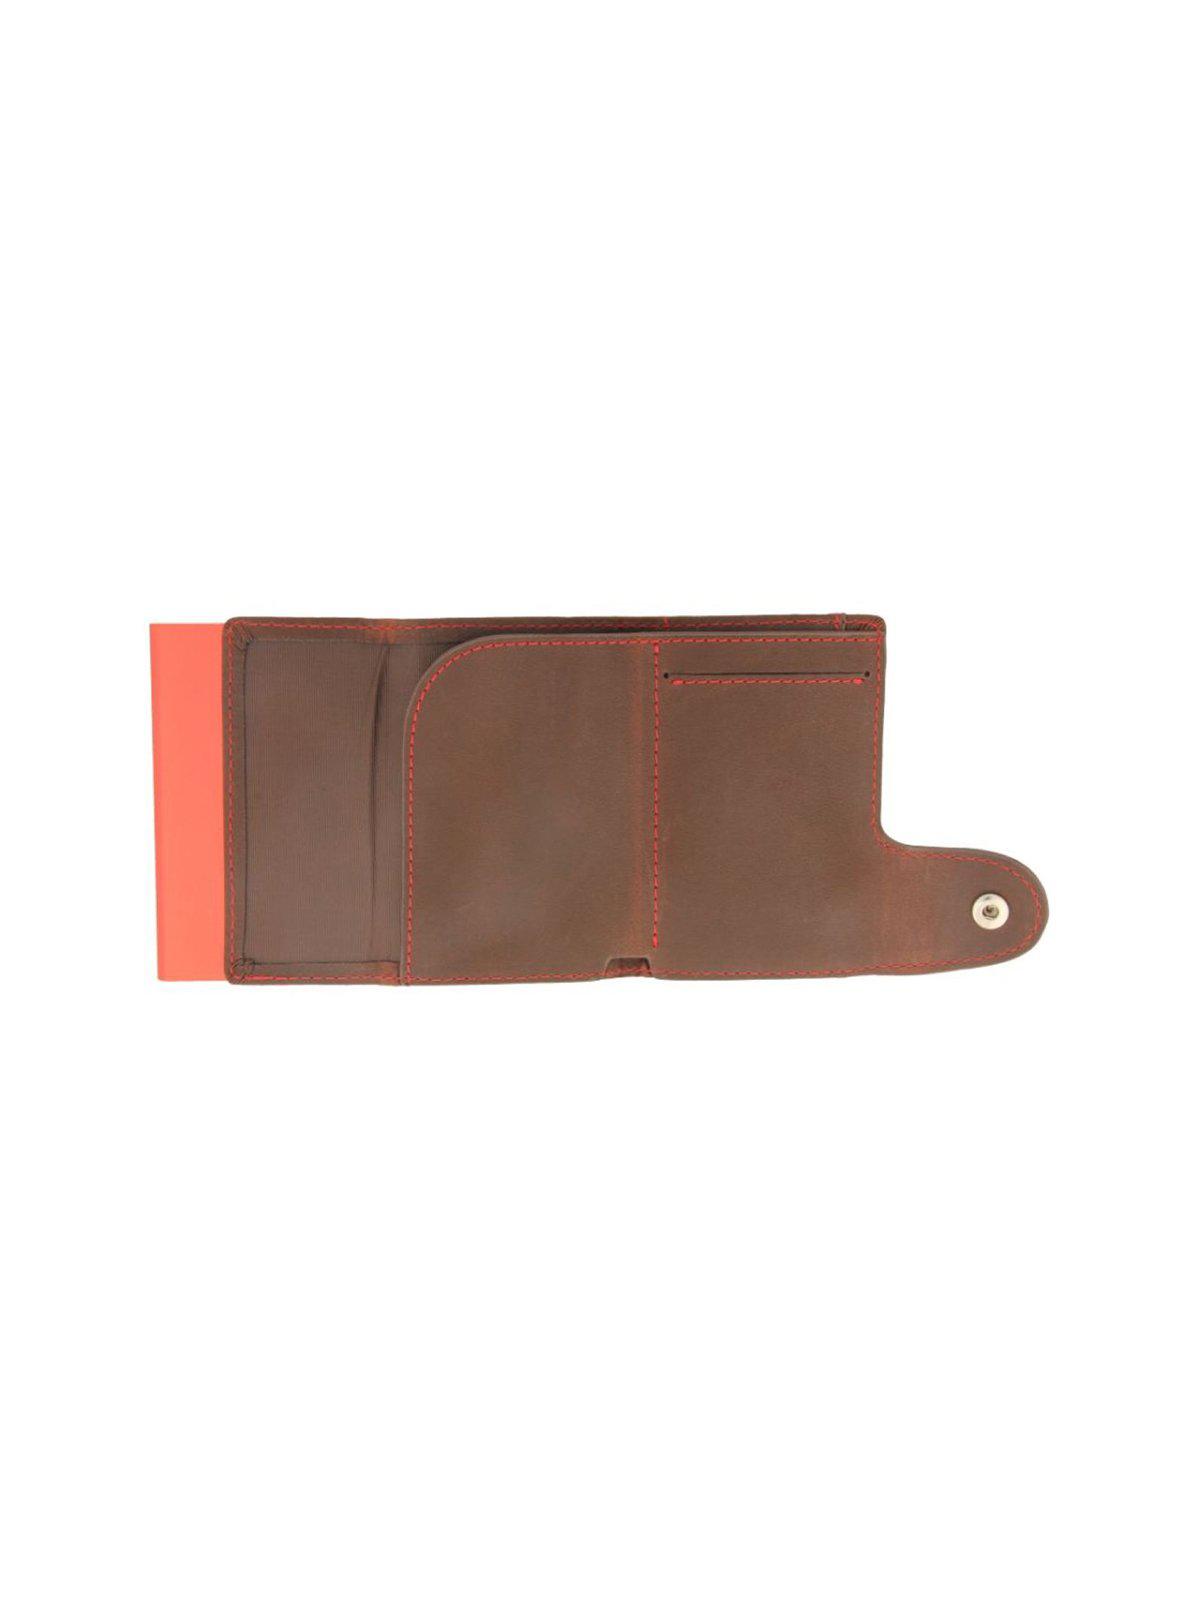 C-Secure Italian Leather RFID Wallet Auburn - MORE by Morello Indonesia